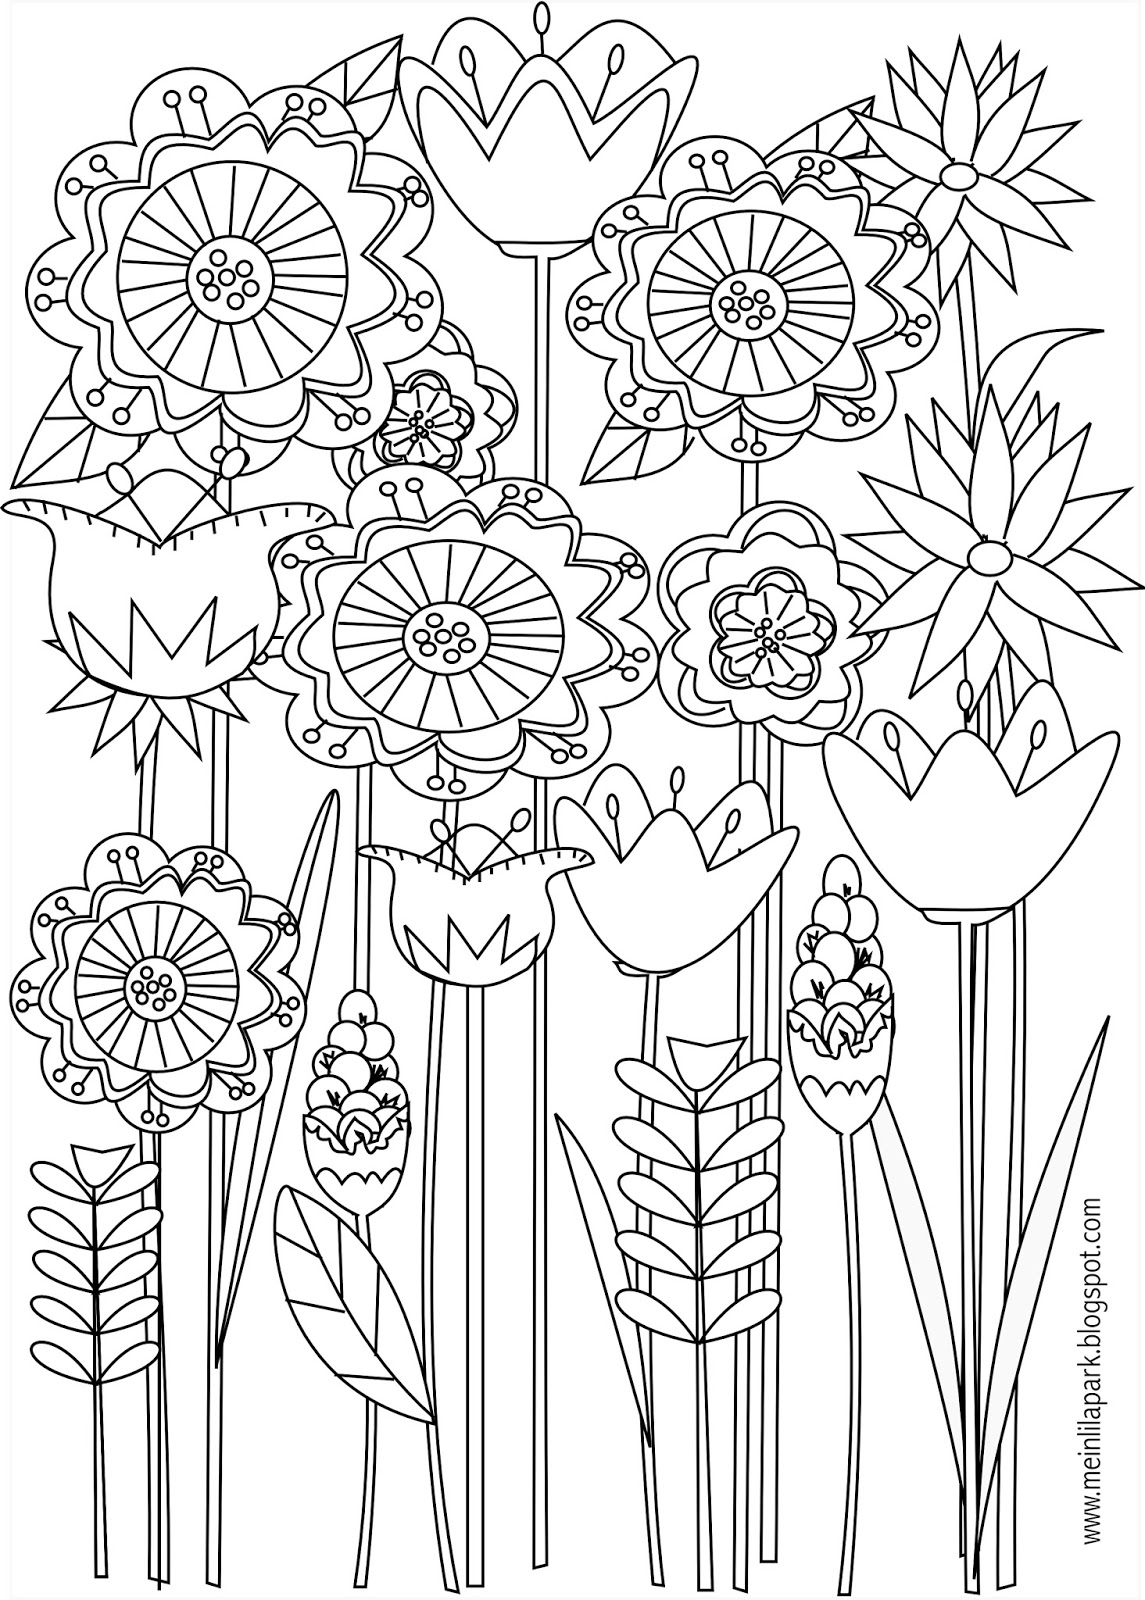 Download Free printable floral coloring page - ausdruckbare ...